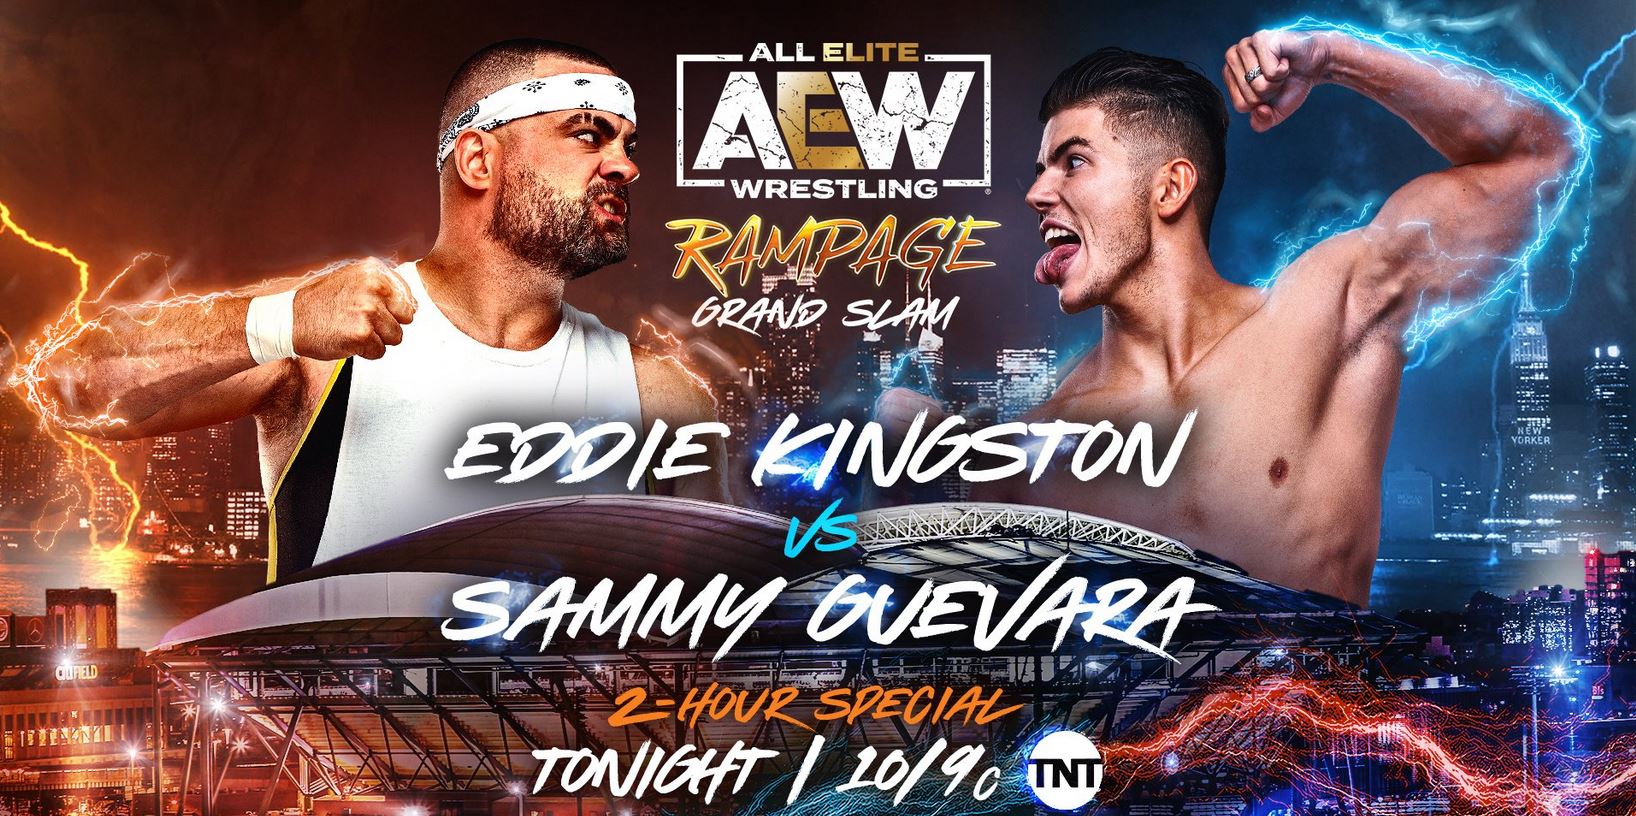 Tony Khan makes pledge for tonight’s AEW Rampage Grand Slam Special, opener confirmed, control center, more